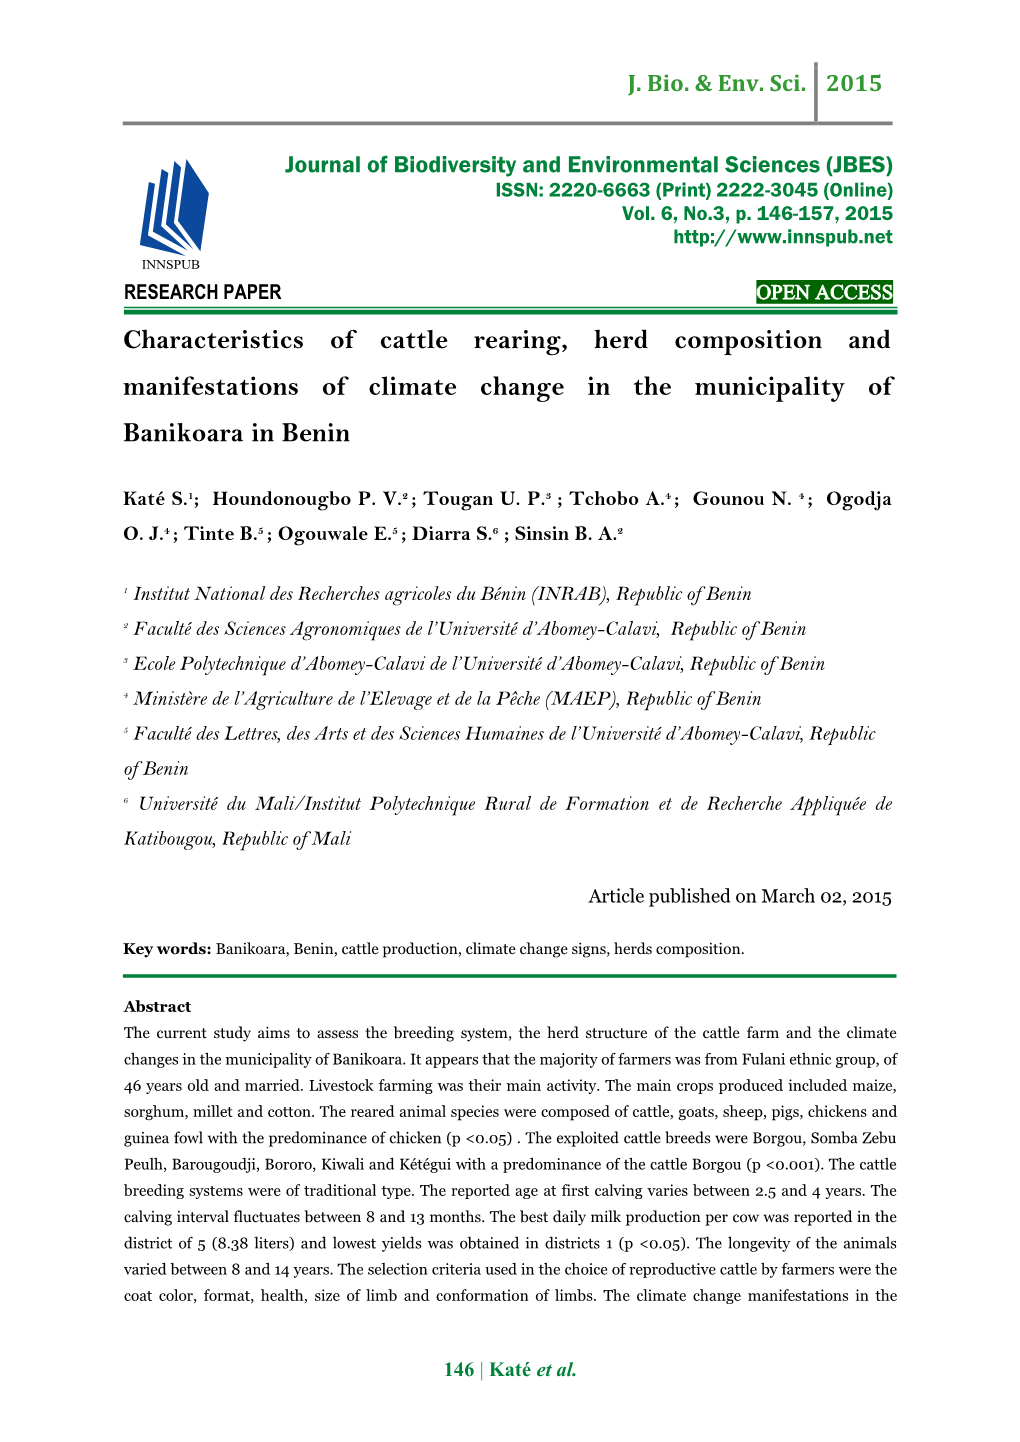 Characteristics of Cattle Rearing, Herd Composition and Manifestations of Climate Change in the Municipality of Banikoara in Benin